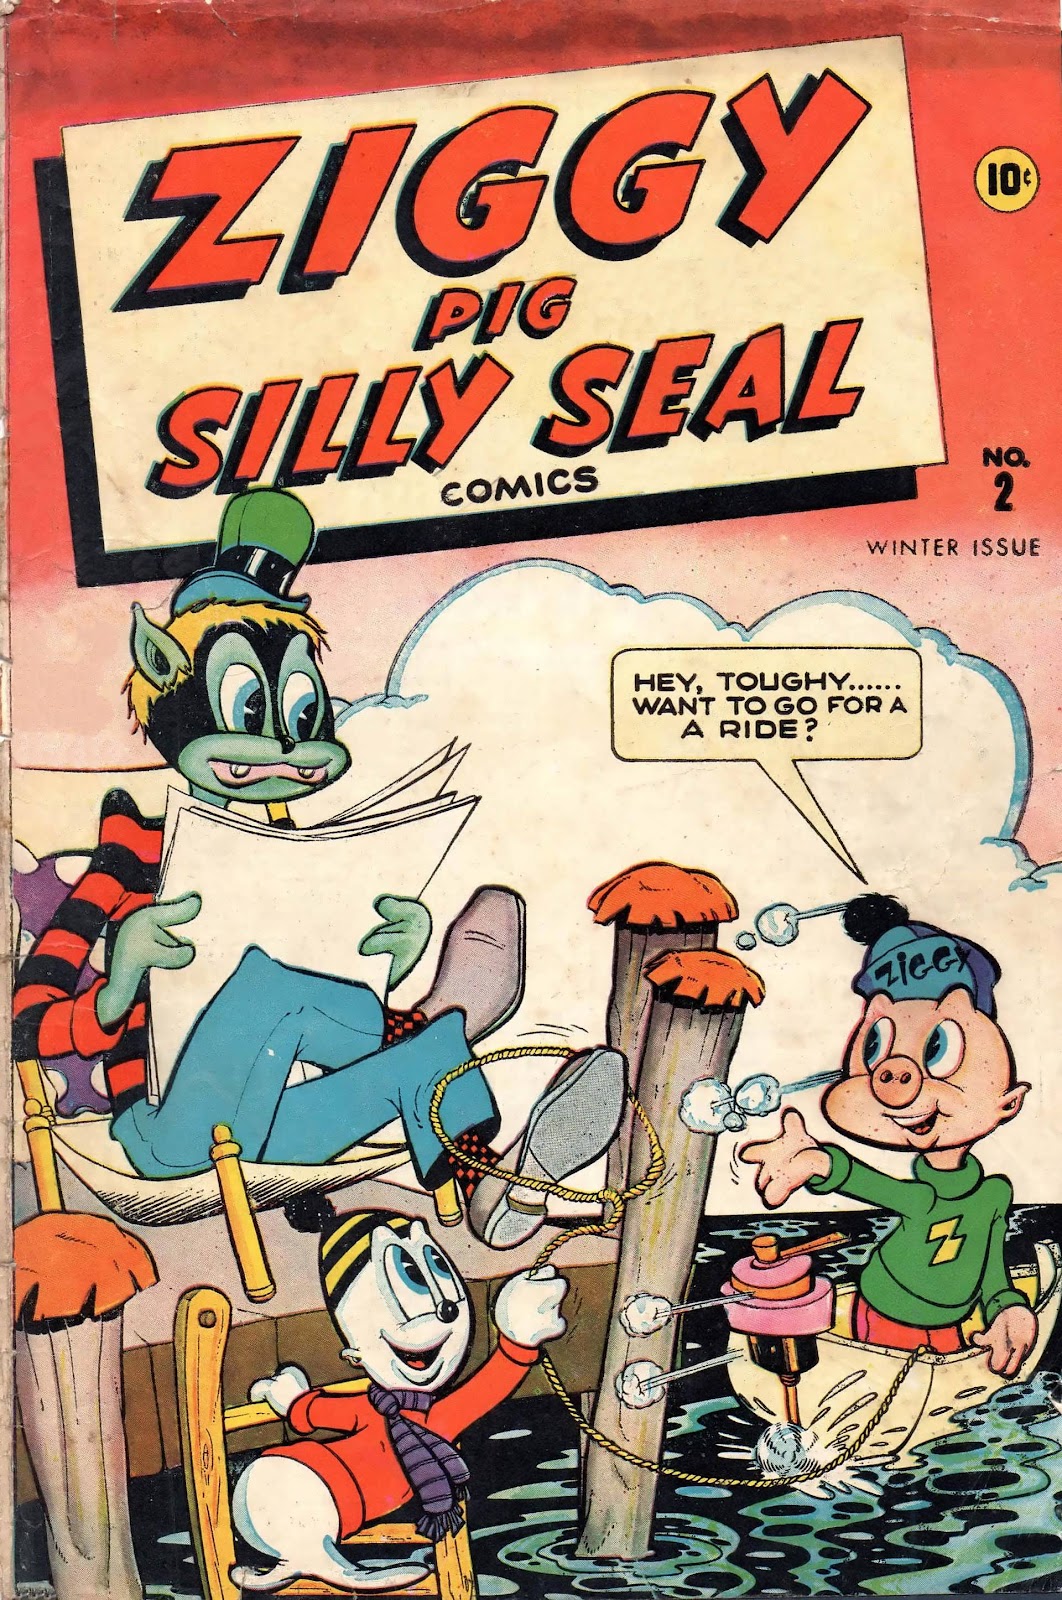 Ziggy Pig-Silly Seal Comics (1944) 2 Page 1